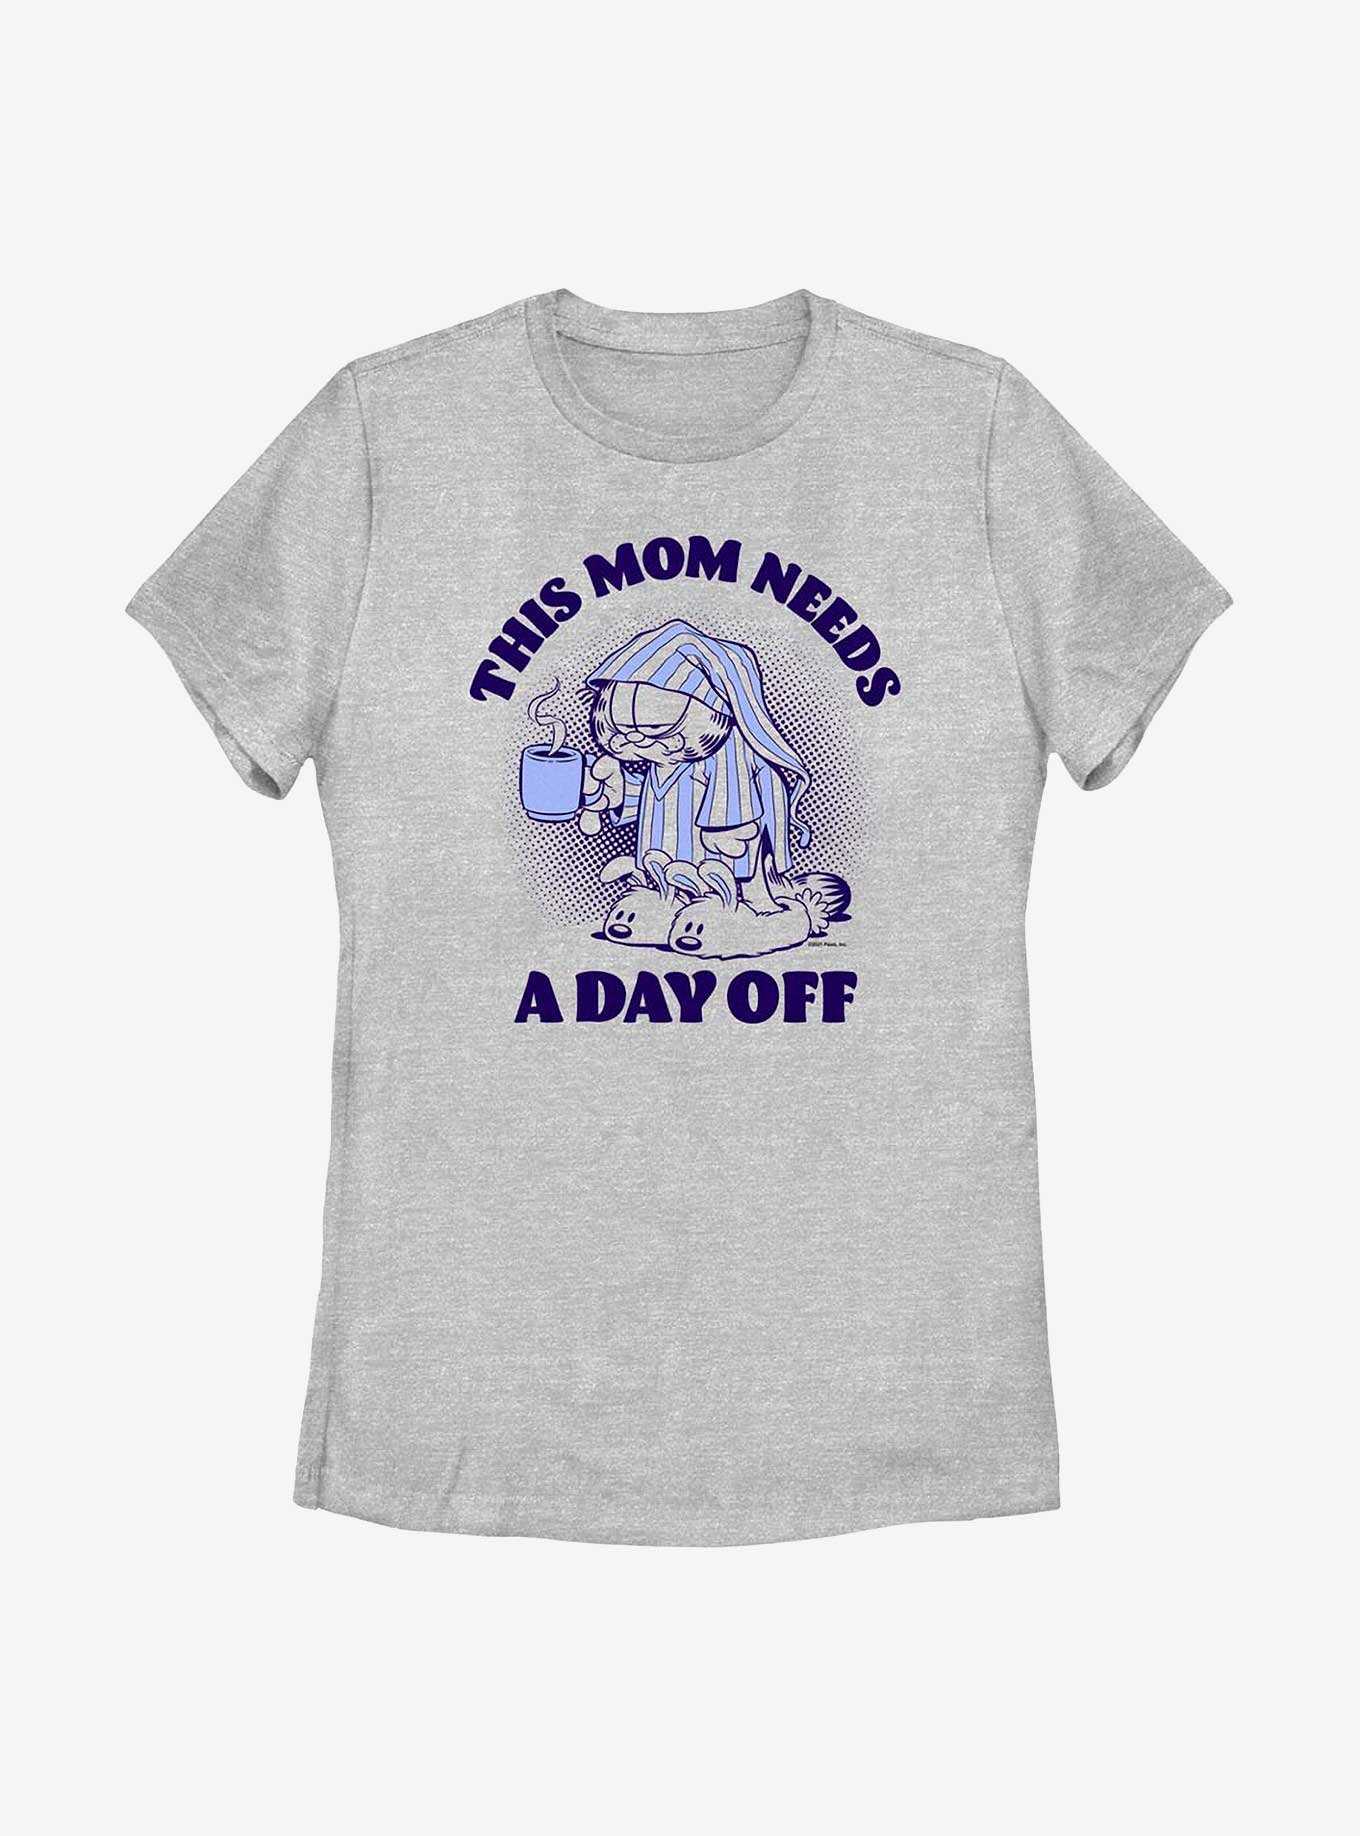 Garfield This Mom Needs A Day Off Women's T-Shirt, , hi-res